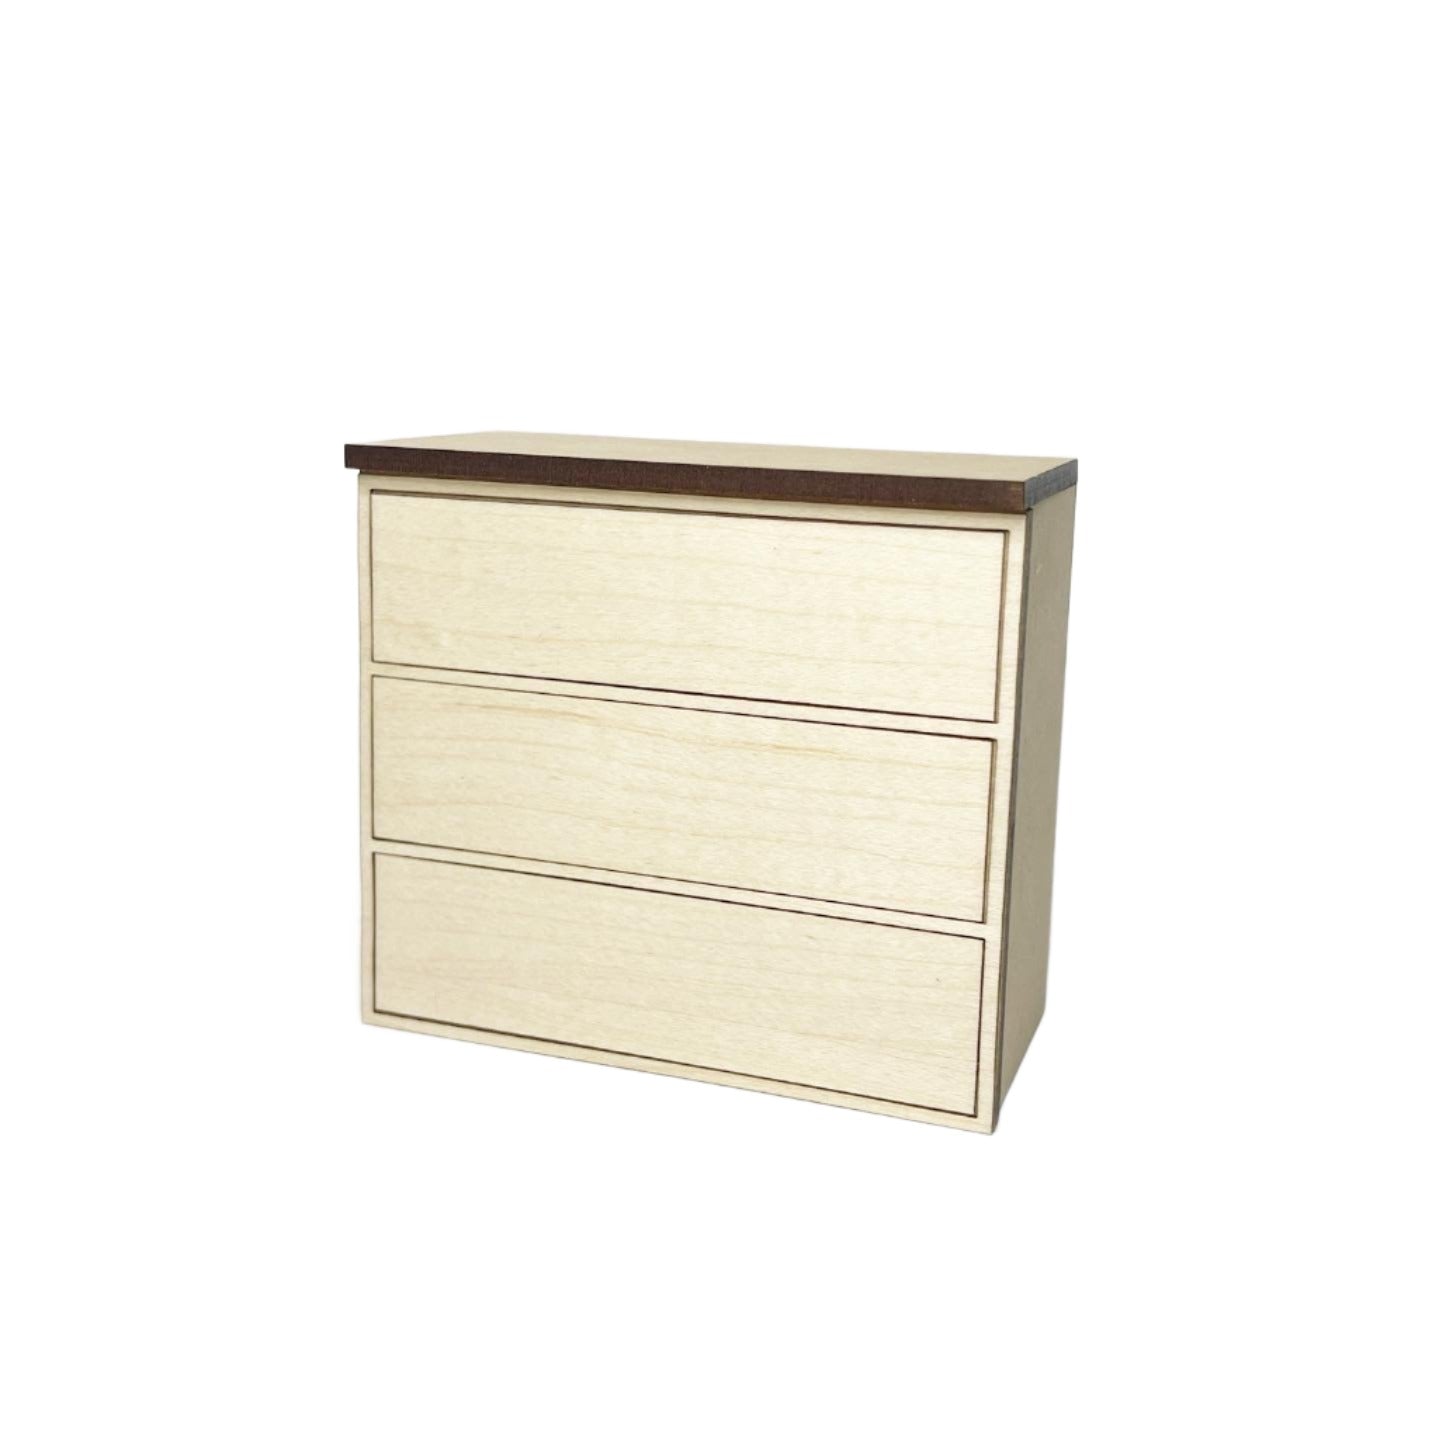 Double Lower Cabinet with 3 Drawers, Standard